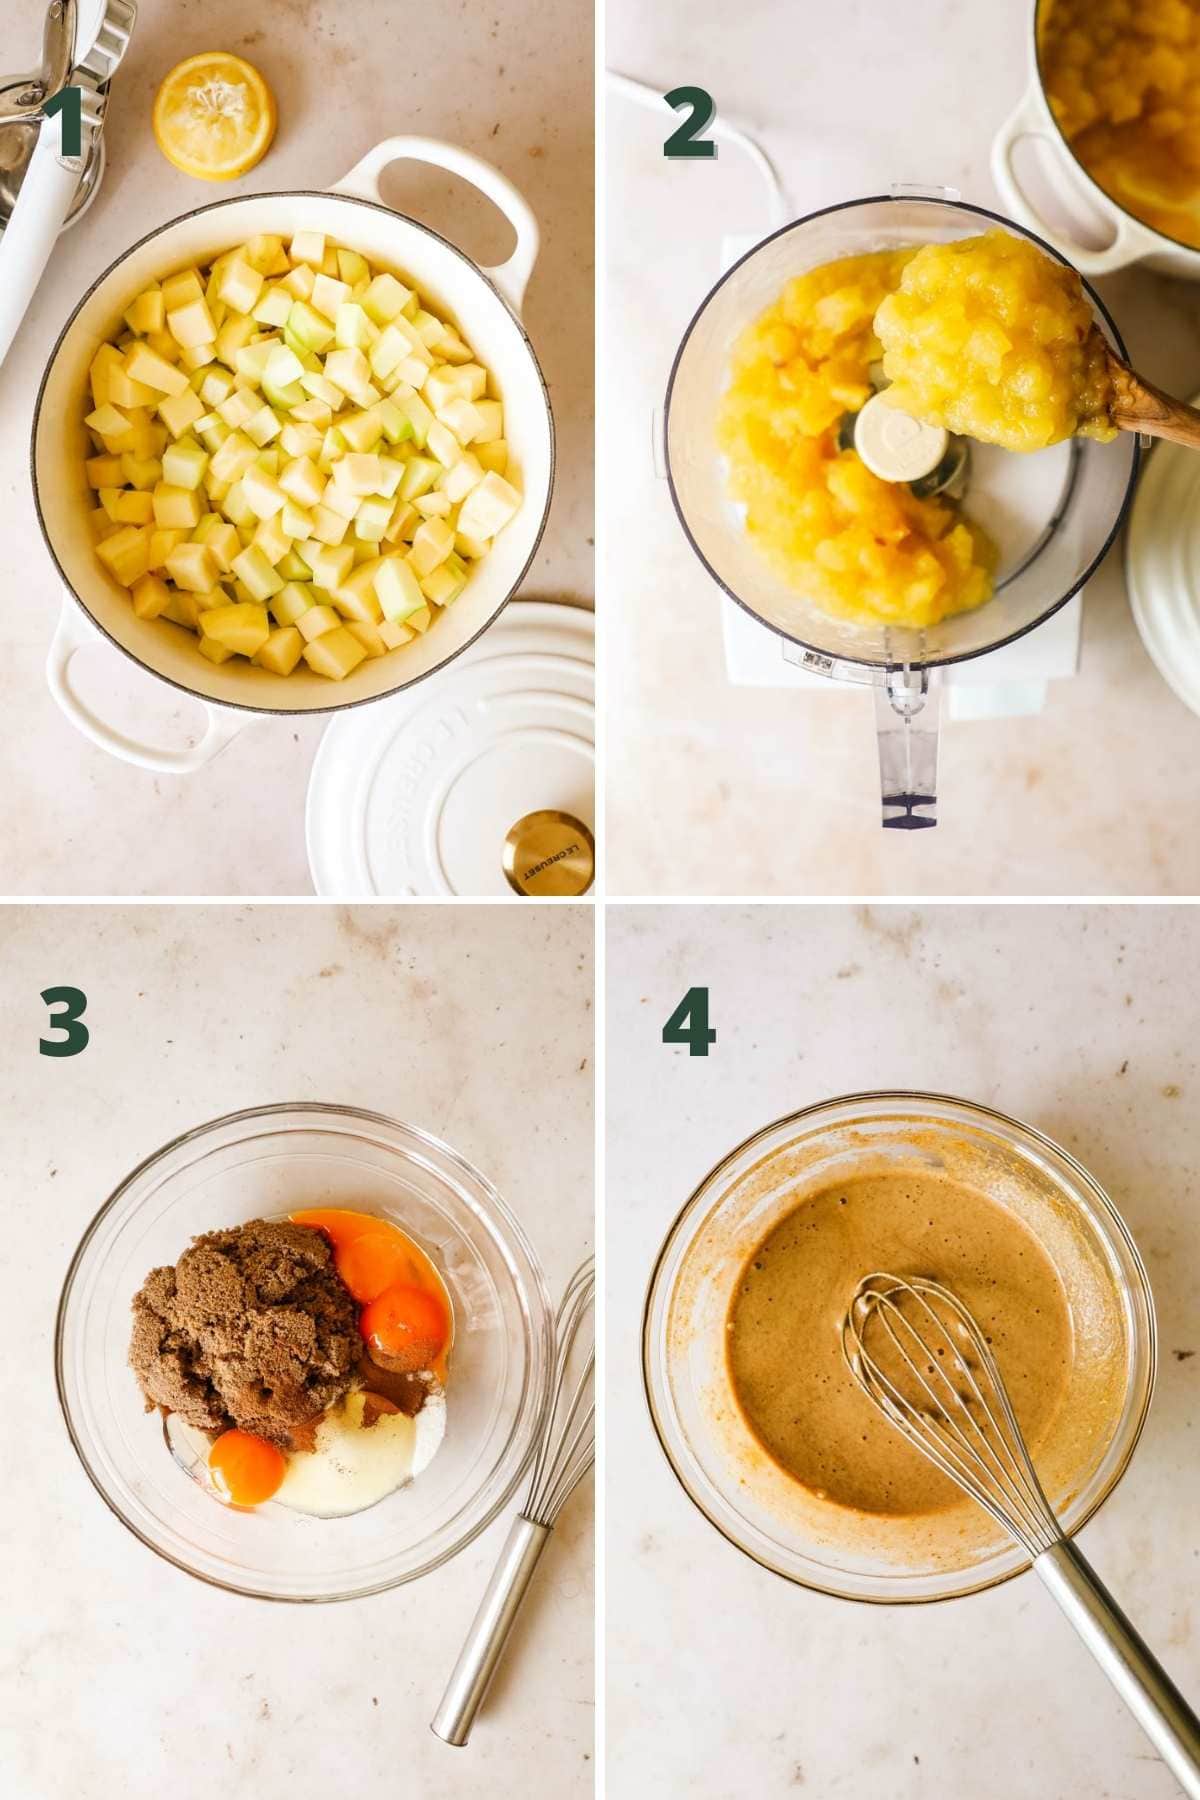 Steps to make apple curd, including cooking the apples, pureeing apples, and mixing sugar with eggs and cinnamon.